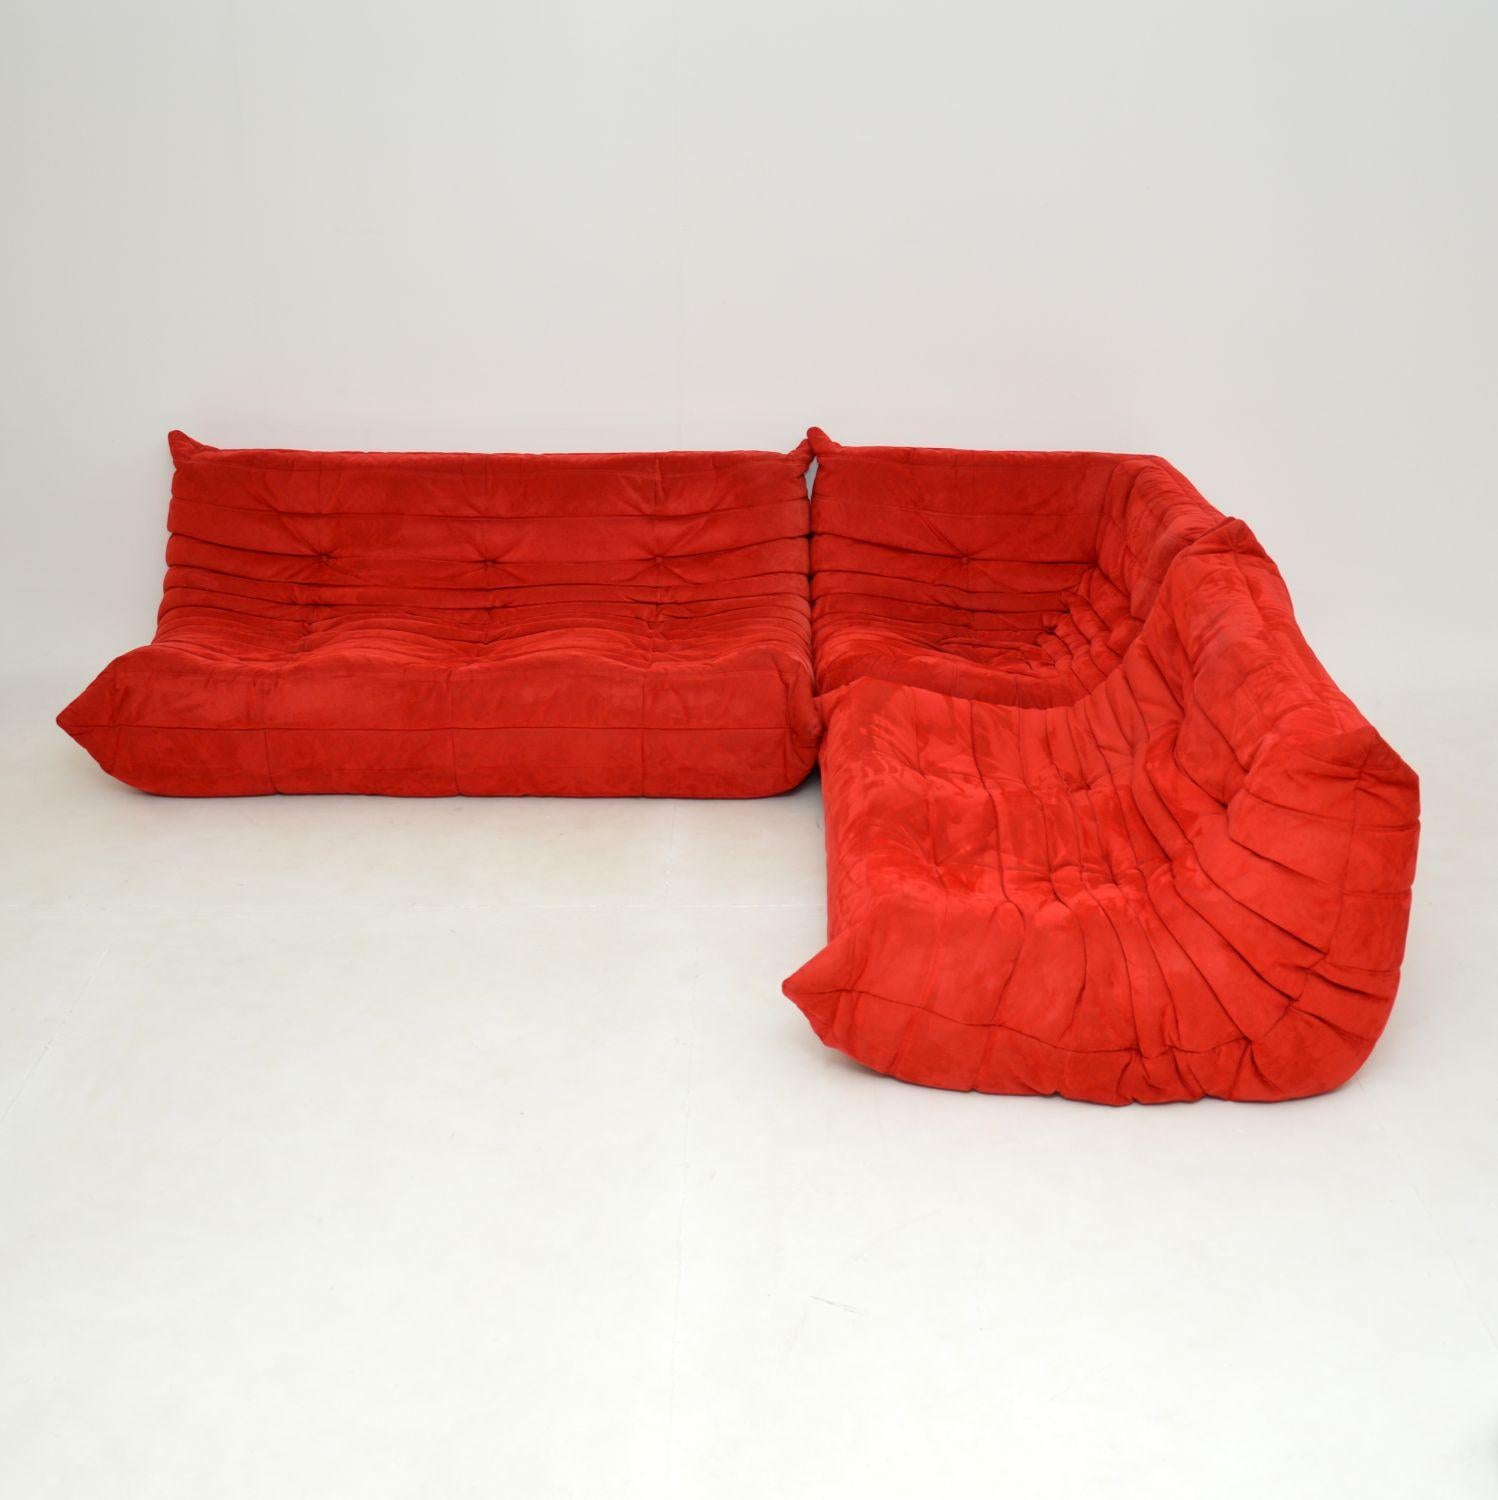 A stylish, iconic and extremely comfortable Ligne Roset Togo sofa suite. This was originally designed in the 1970’s, and this model is a more recent version. It is a genuine Ligne Roset Togo, made in France and fully labelled.

The condition is